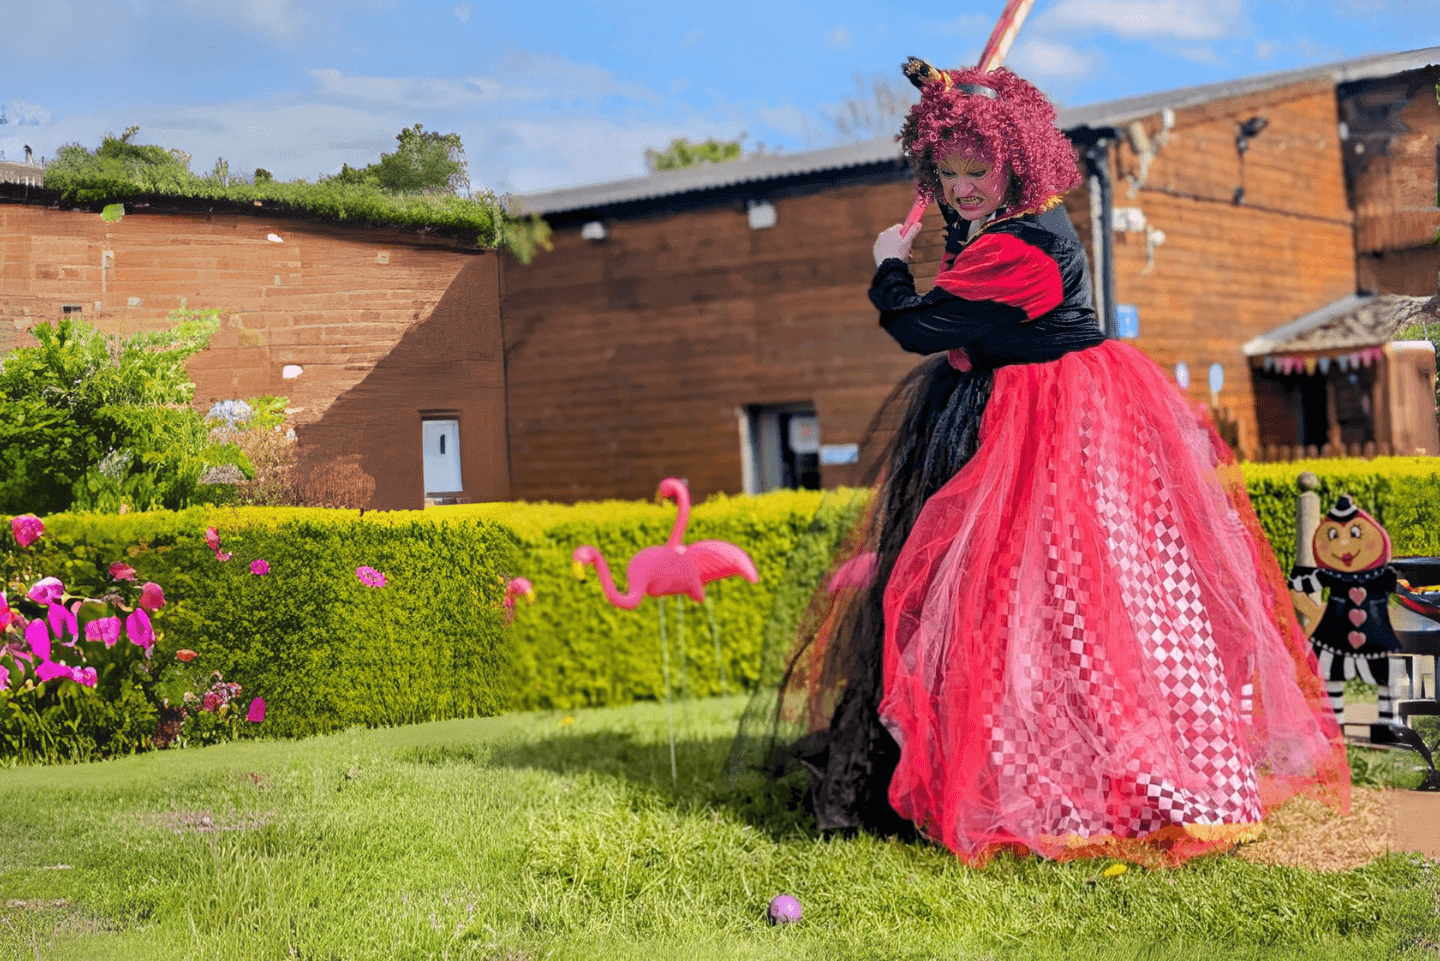 Queen of Hearts at Stockeld Park playing croquet 